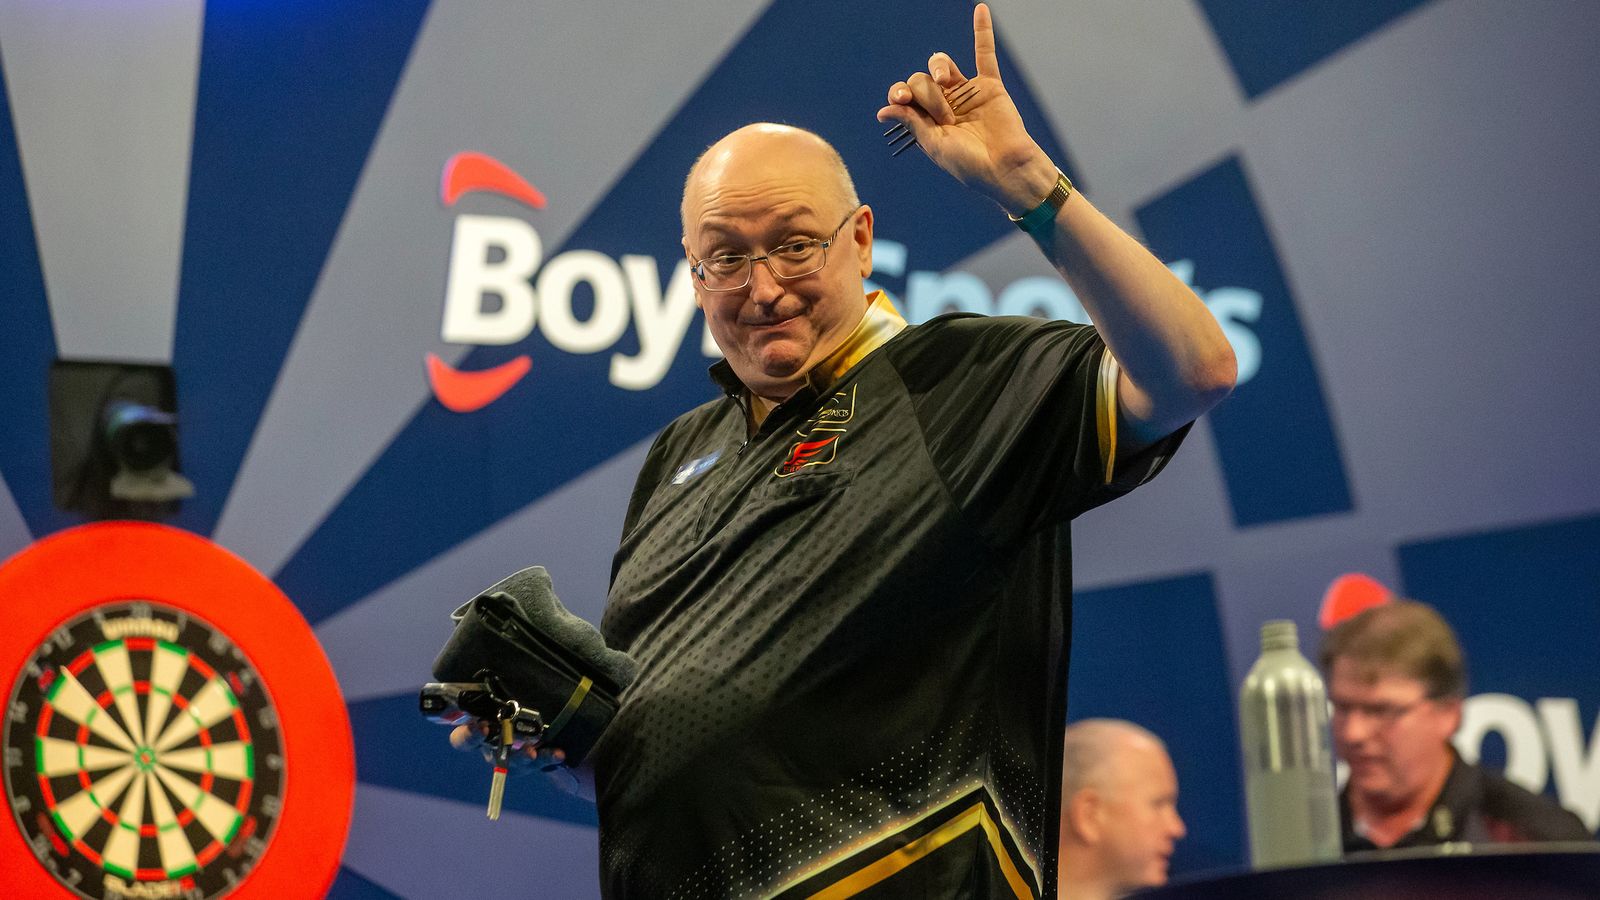 World Grand Prix: Andrew Gilding shocks Gary Anderson as Gerwyn Price and Michael Smith ease through | Darts News